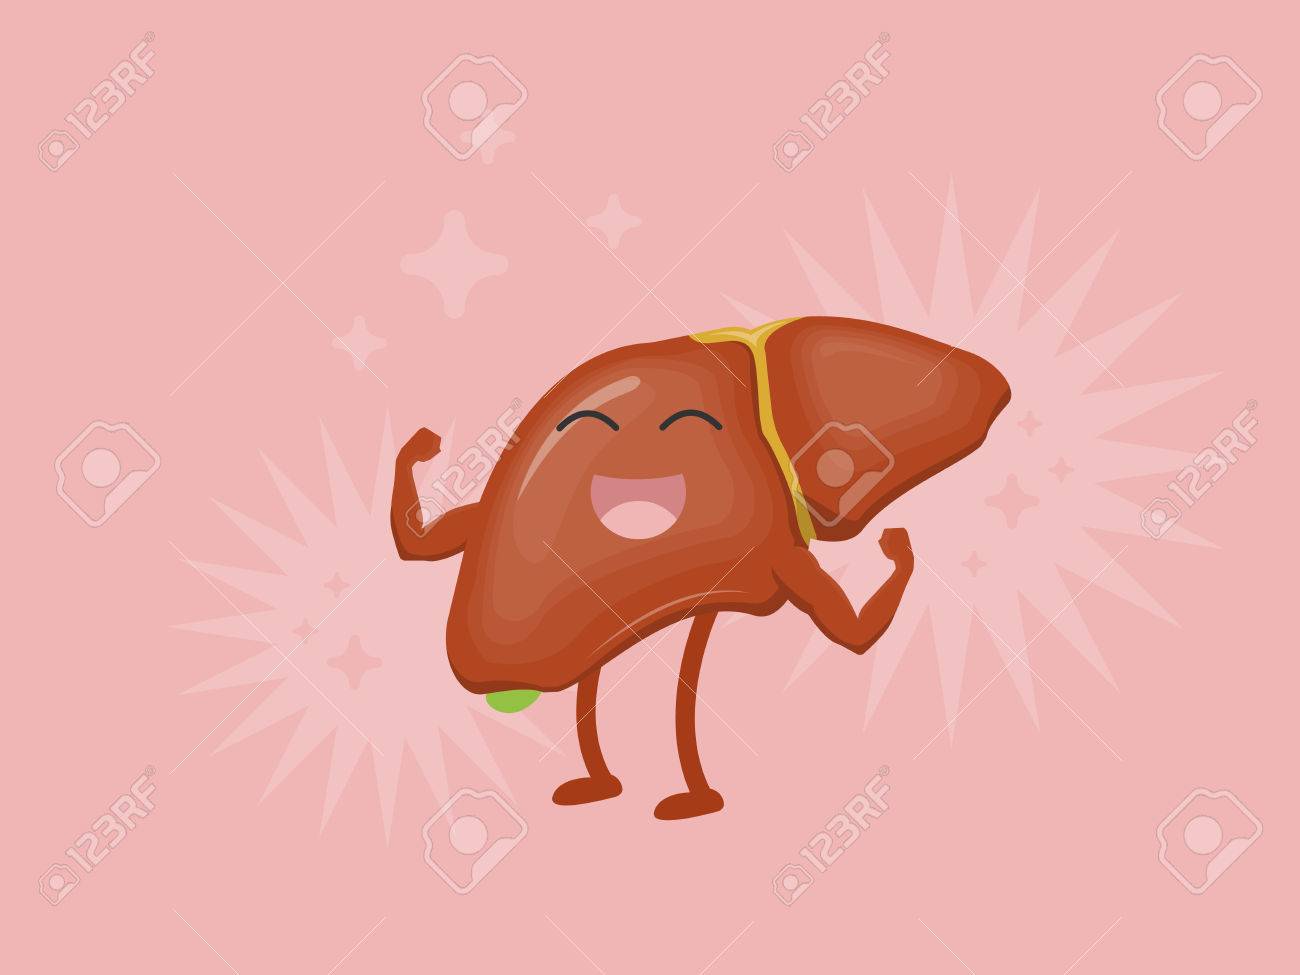 Vector Cartoon Strong Liver With Healthy Effect On Pink Background